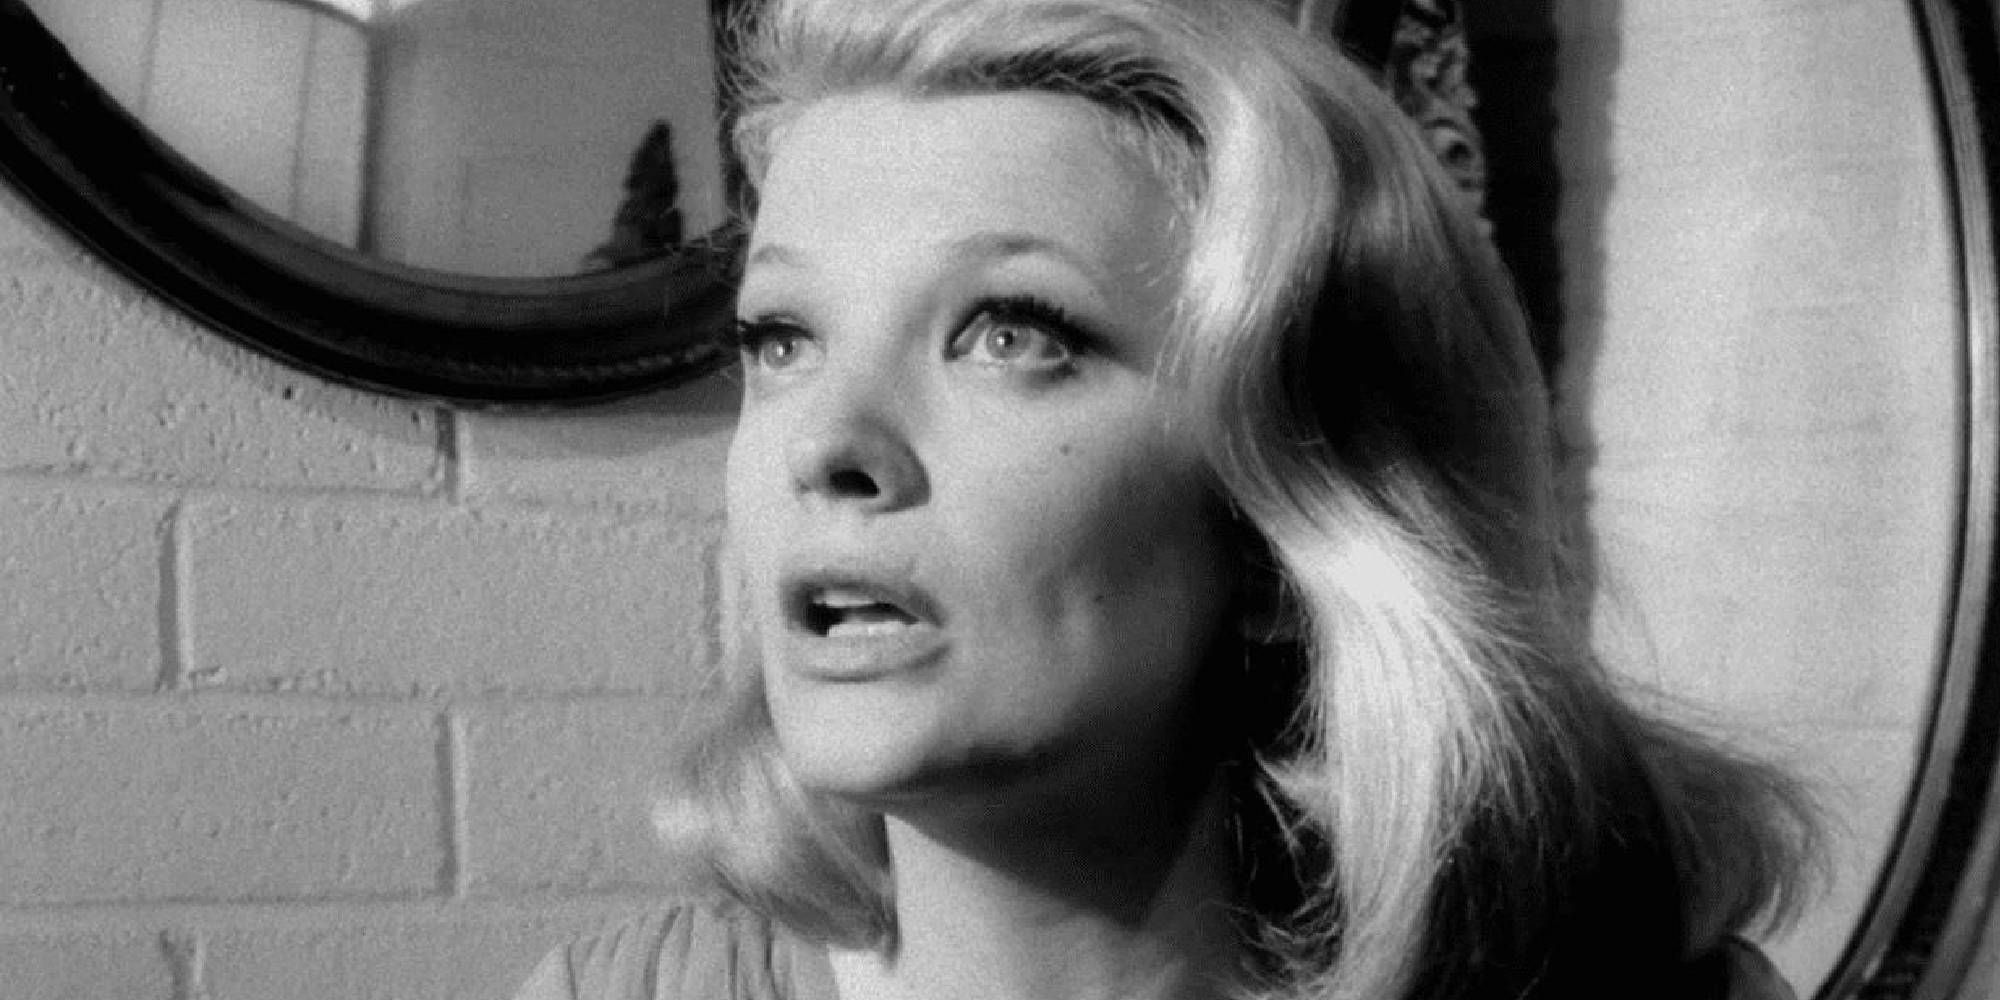 Gena Rowlands speaking while looking at someone or something off-camera in Faces